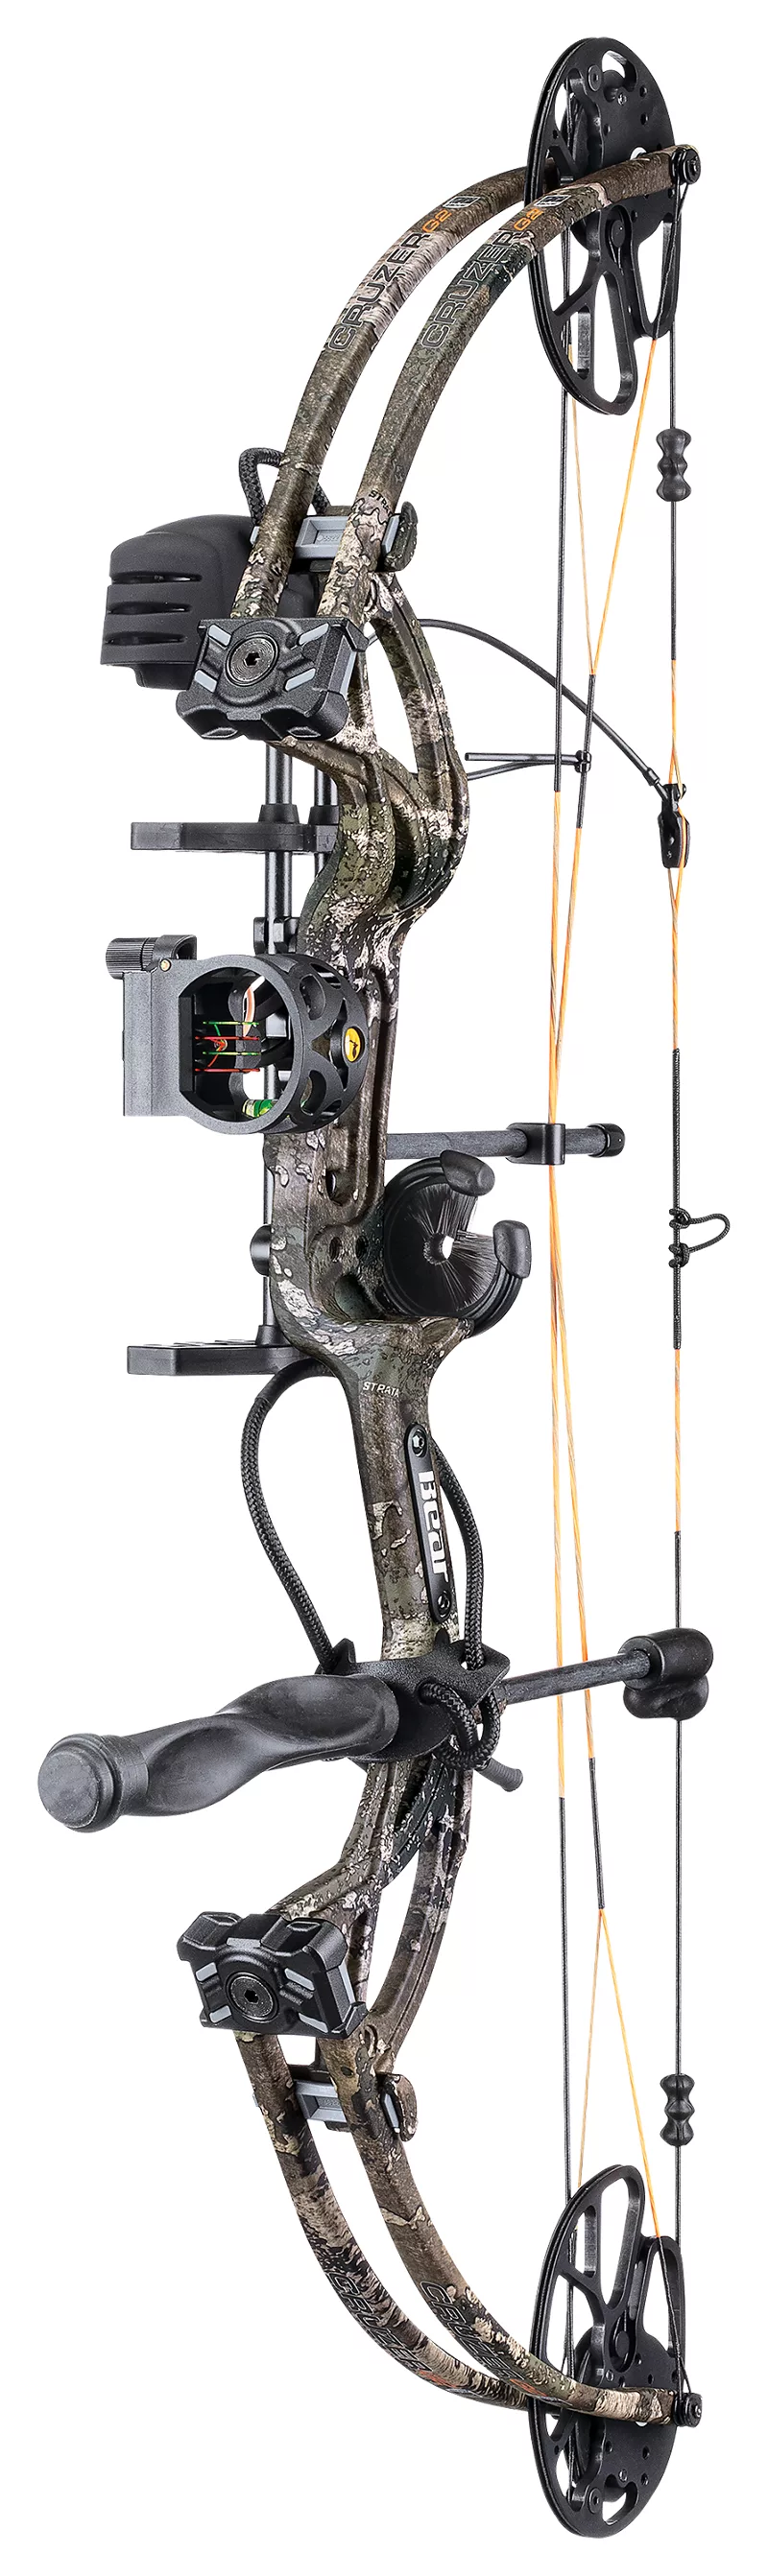 Bear Archery Cruzer G2 RTH Compound Bow Package - Right Hand - TrueTimber Strata - $419.99 (Free S/H over $50)